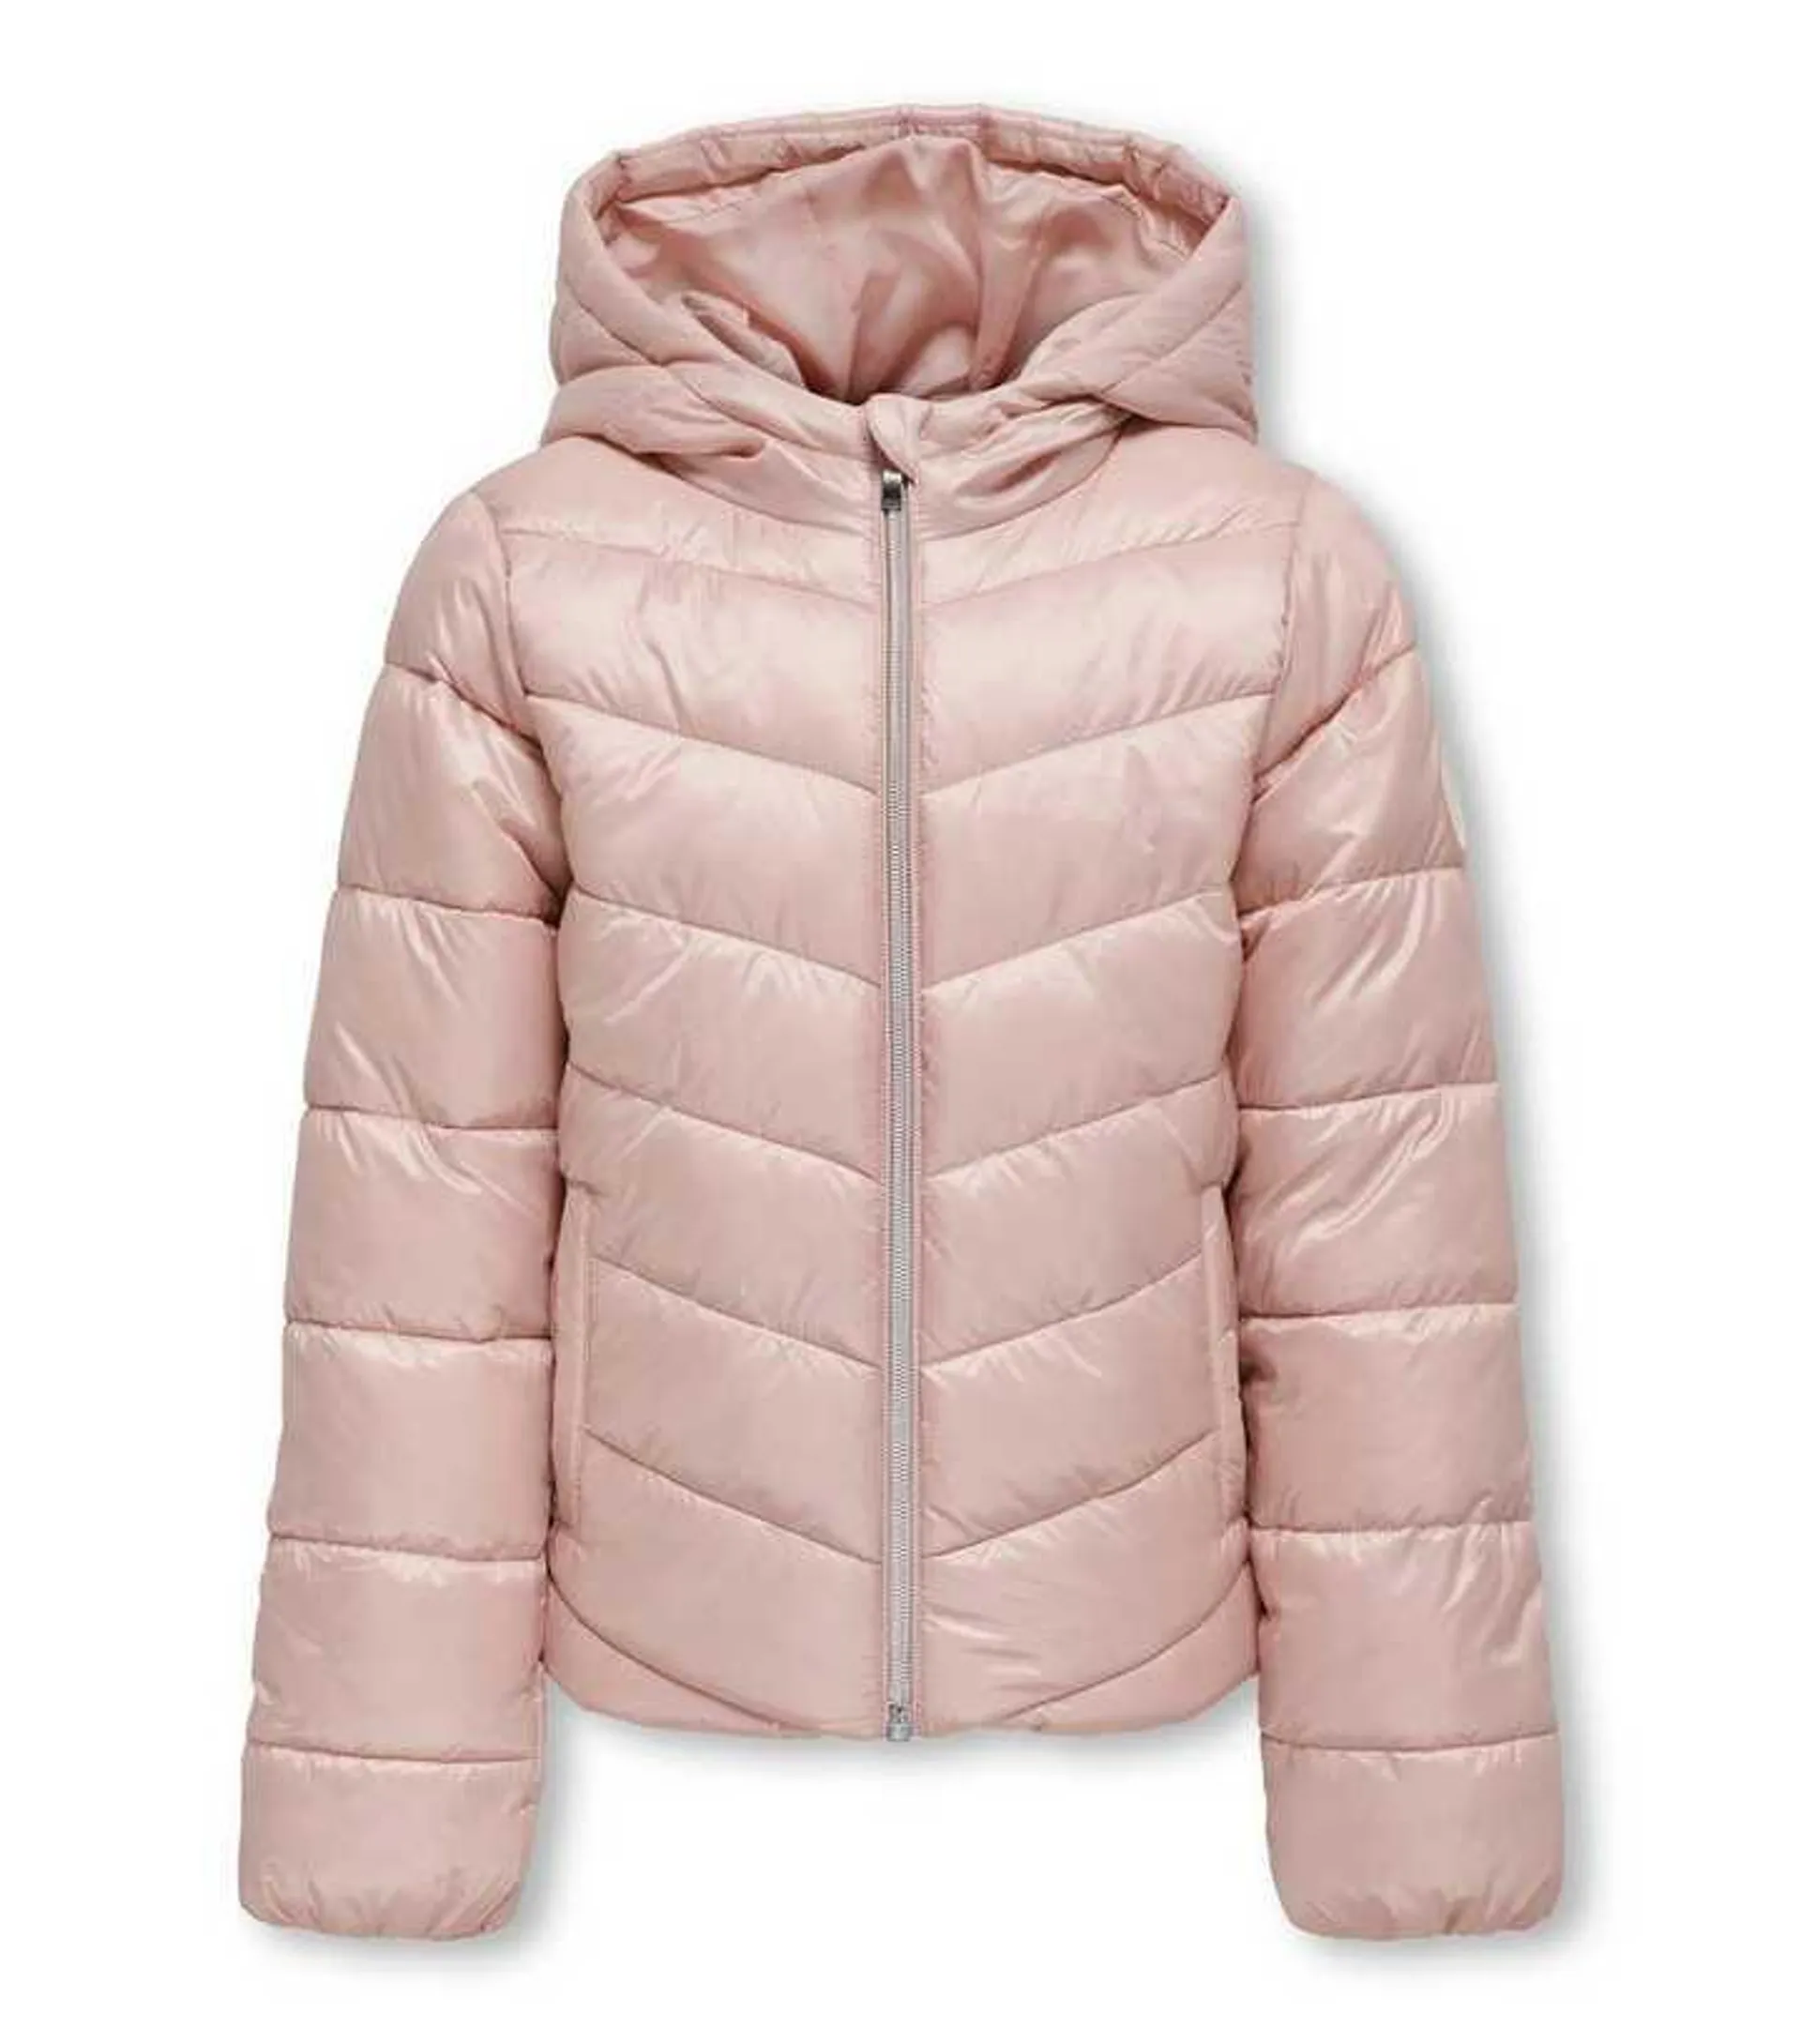 KIDS ONLY Pink Hooded Puffer Jacket